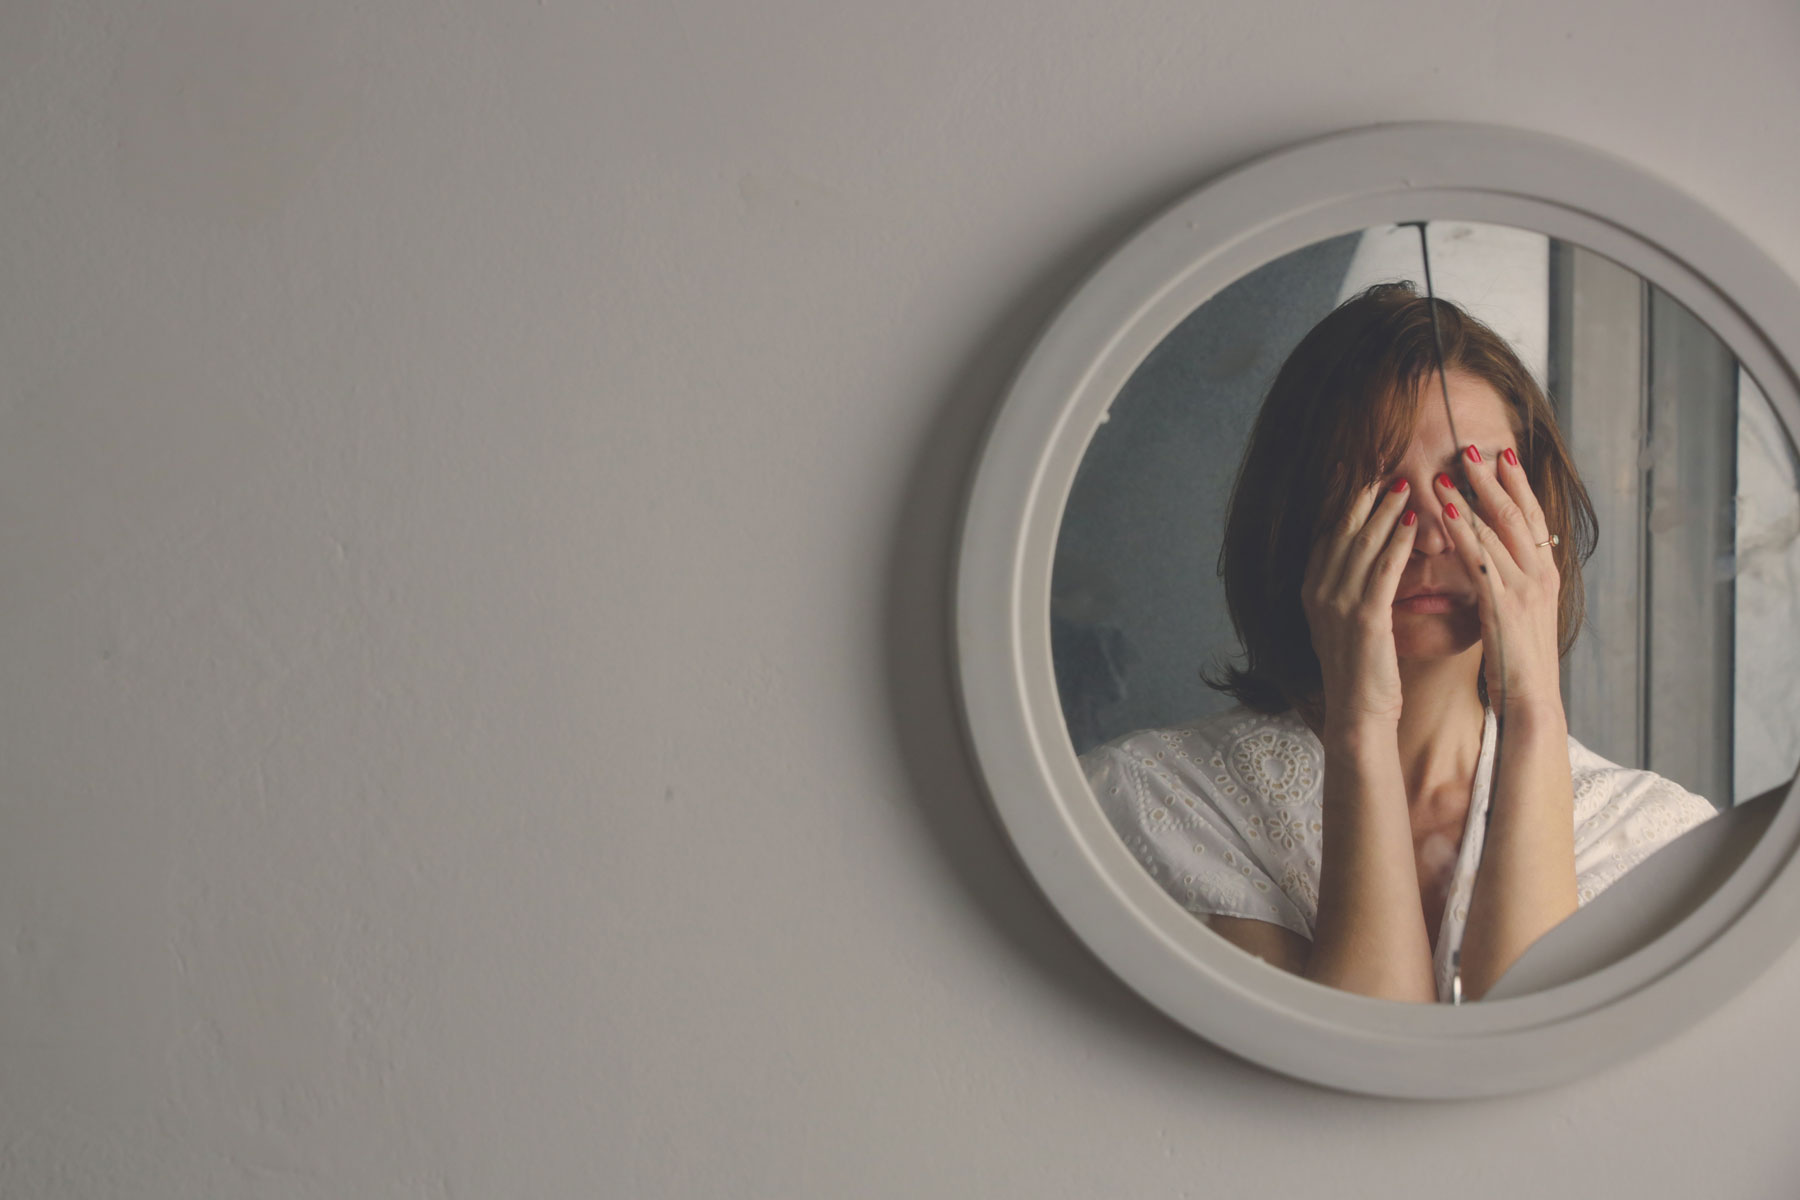 a person can't look themselves in the mirror as they wonder about histrionic personality disorder vs bpd